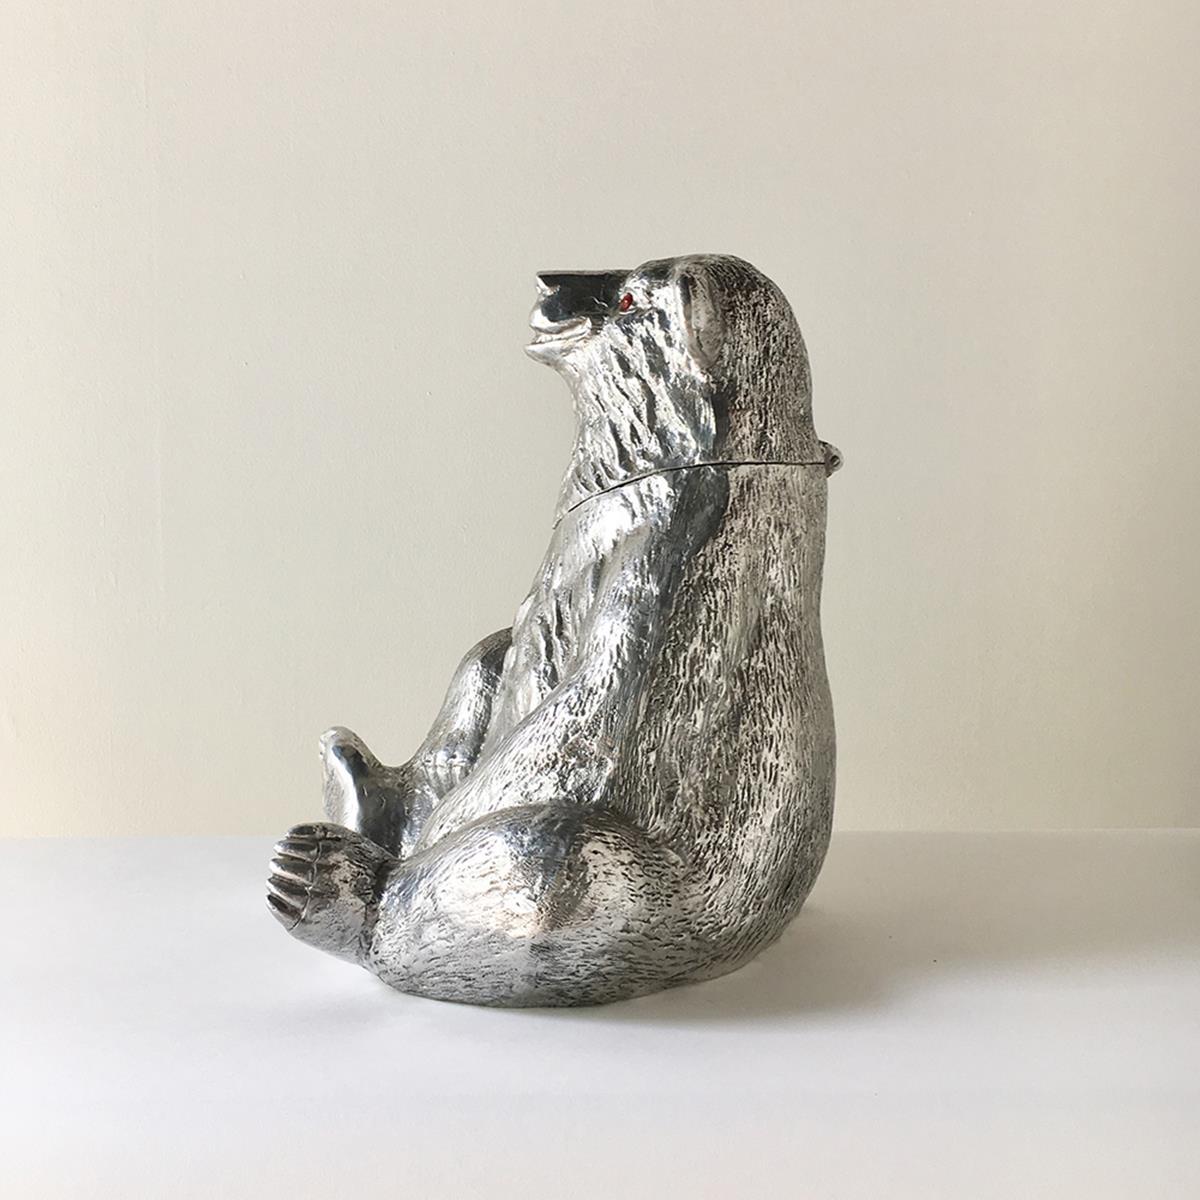 Arthur Court designed cast aluminium bear champagne/wine cooler bucket, 1988.
The bears head with carnelian eyes opens on hinges backwards to reveal the interior (Opening measures 16cm wide x 15.5cm high) where the bottle is placed. Stamped to the